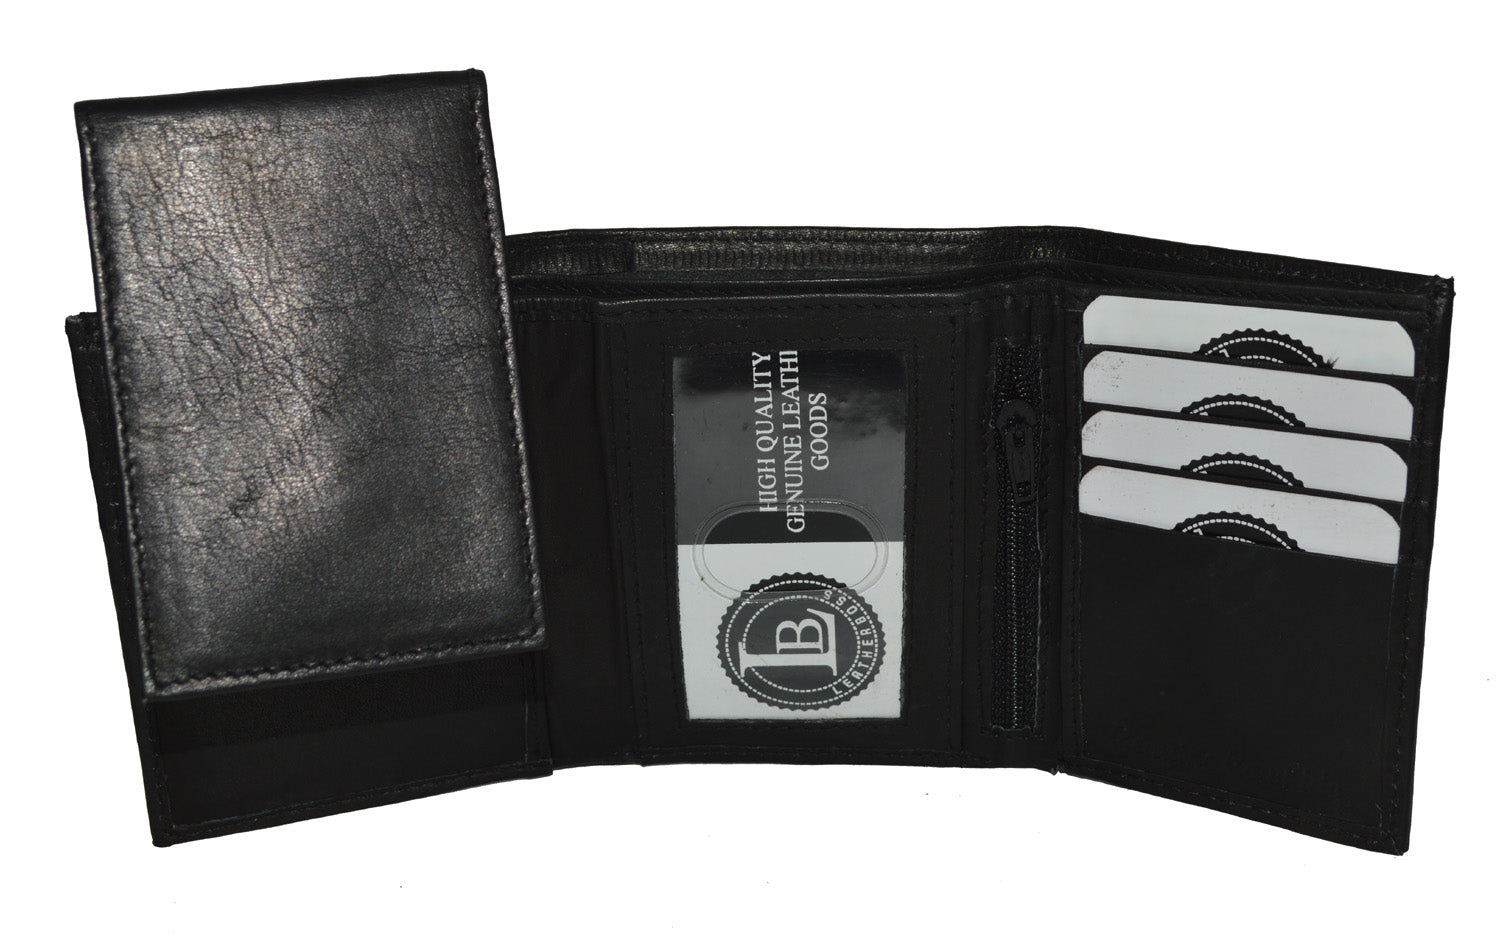 LEATHERBOSS GENUINE LEATHER WALLET TRIFOLD PULL OUT FLAP ID POCKET BLACK